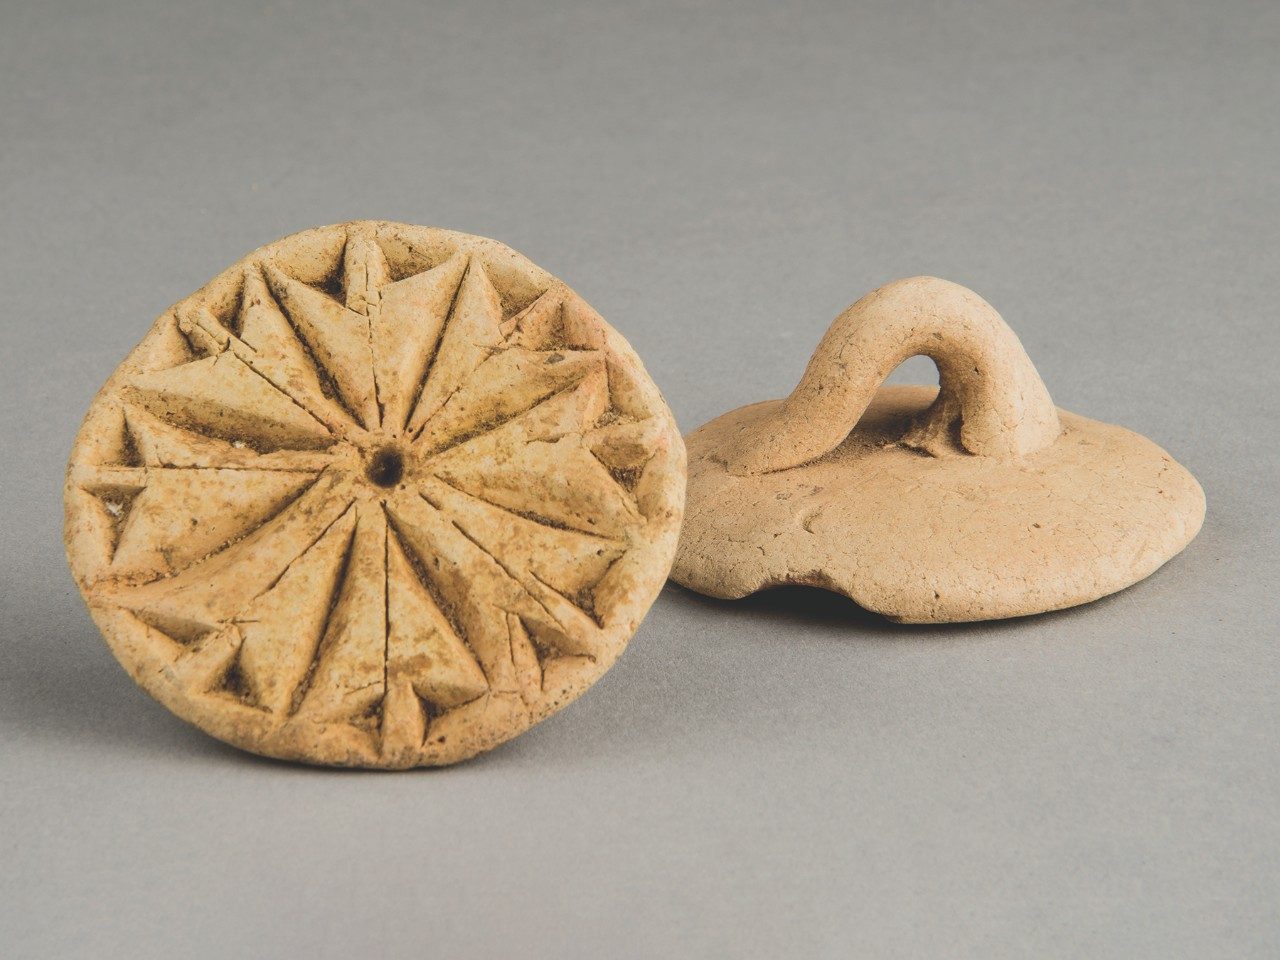 Two tan clay bread stamps rest side by side. One is flipped over, revealing its geometric pattern, while the other is facedown, showing a small handle or fingerhold.